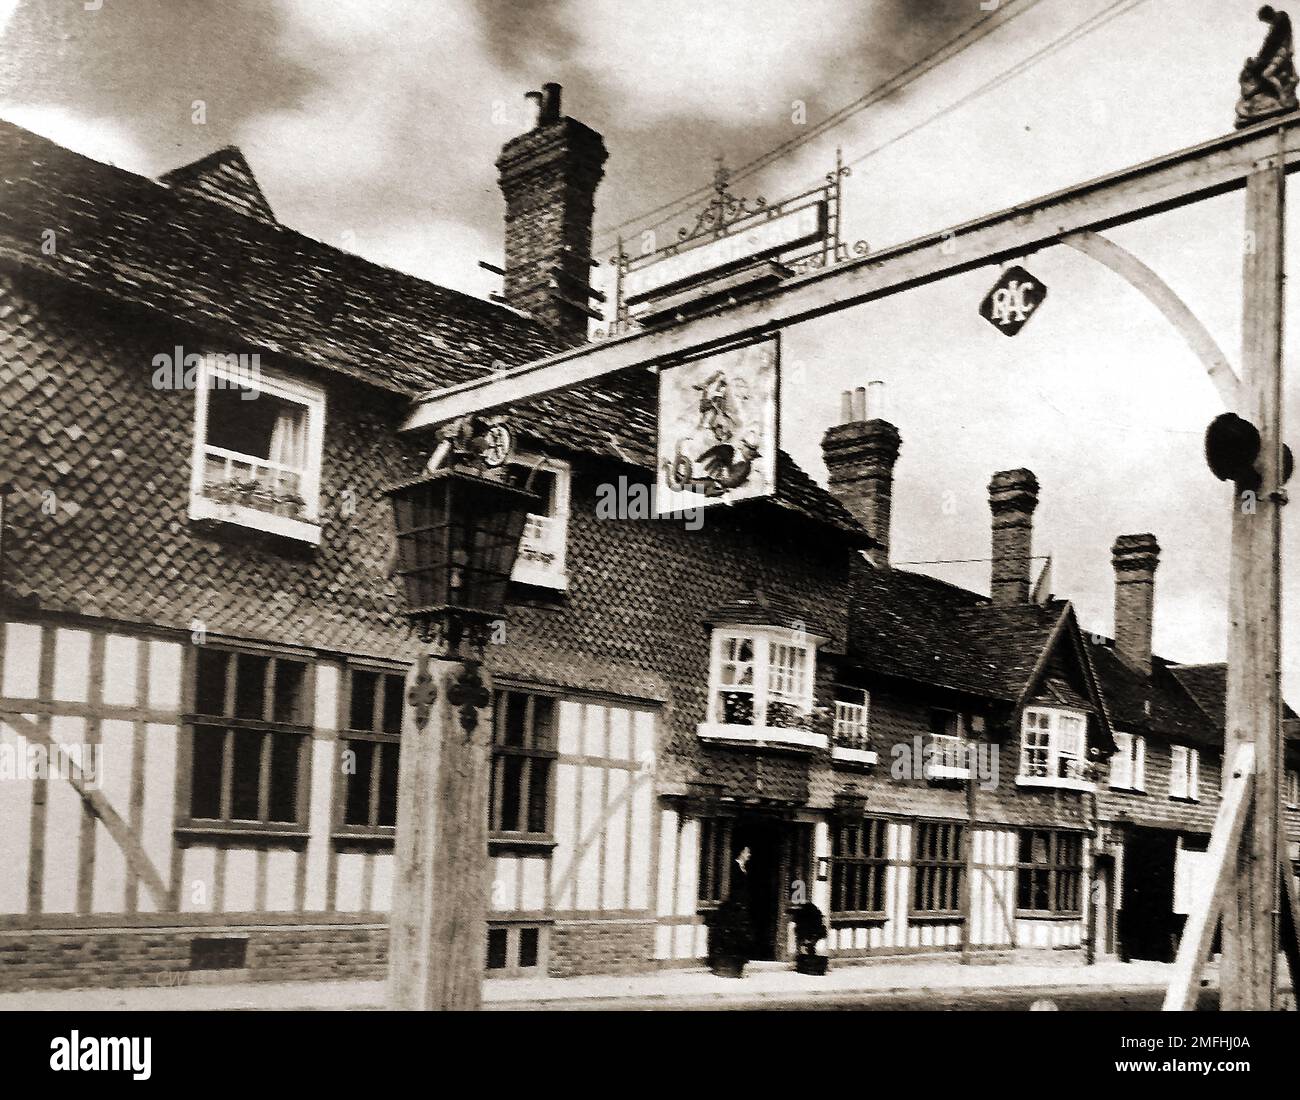 British pubs inns & taverns - A circa 1940 old photograph of he George at Crawley with its gallows inn sign. Stock Photo